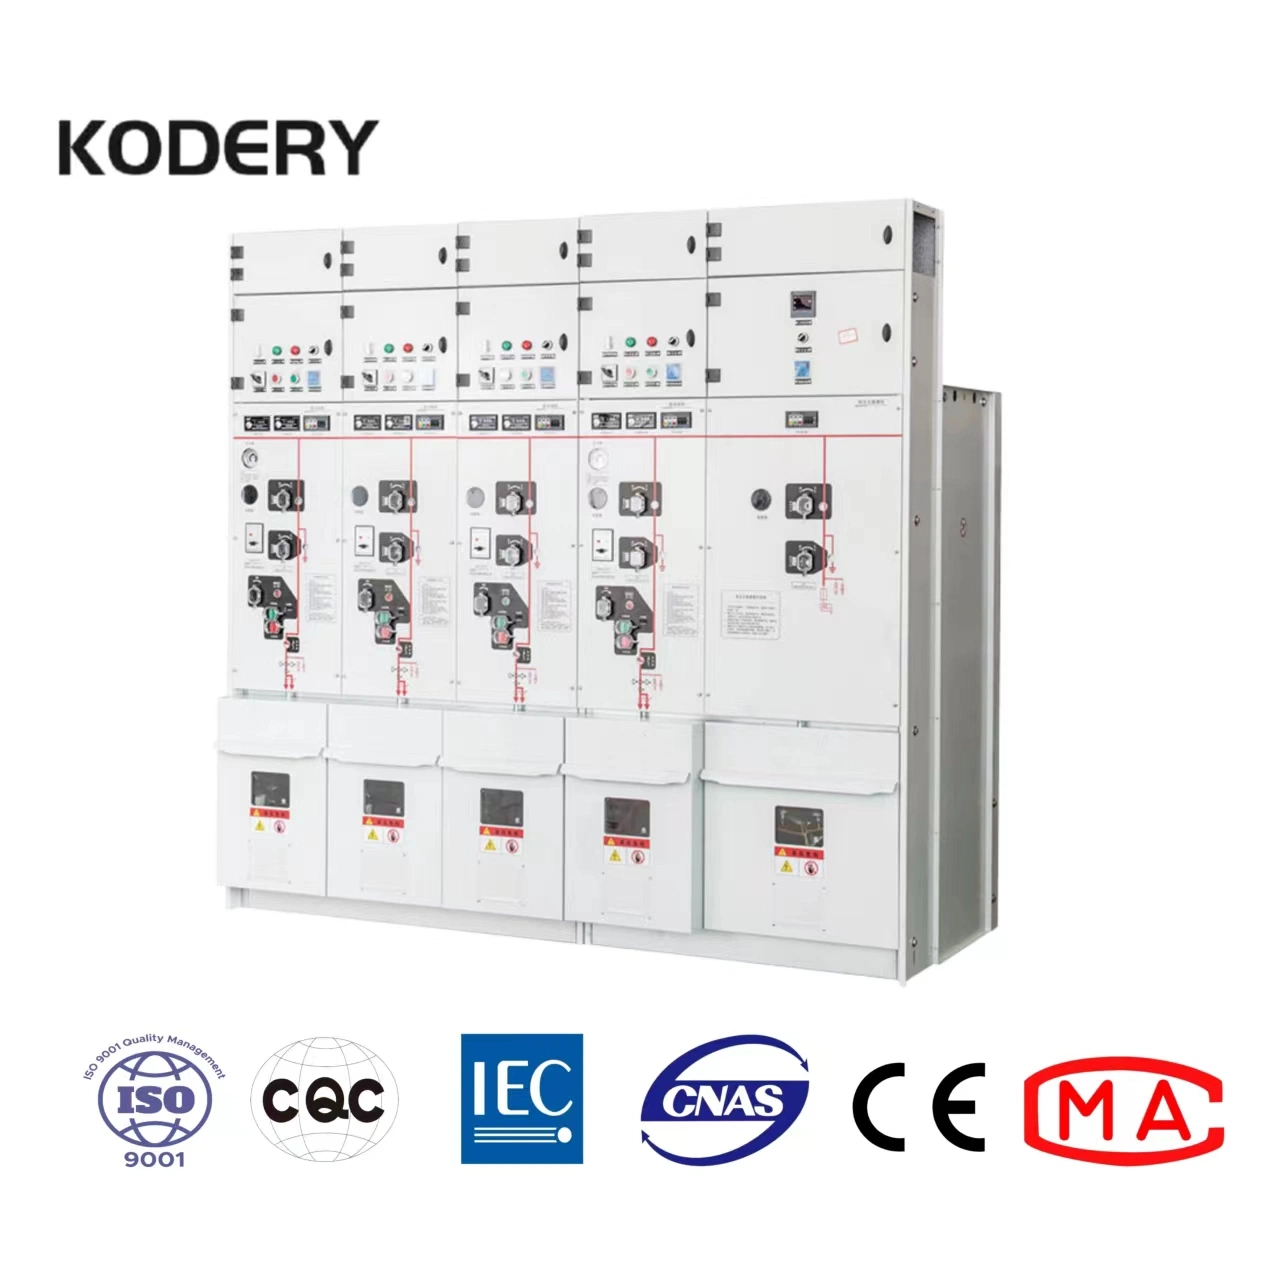 Kodery Xgn15-12 24 Metal Closed Ring Network Gas Insulated Swithgear